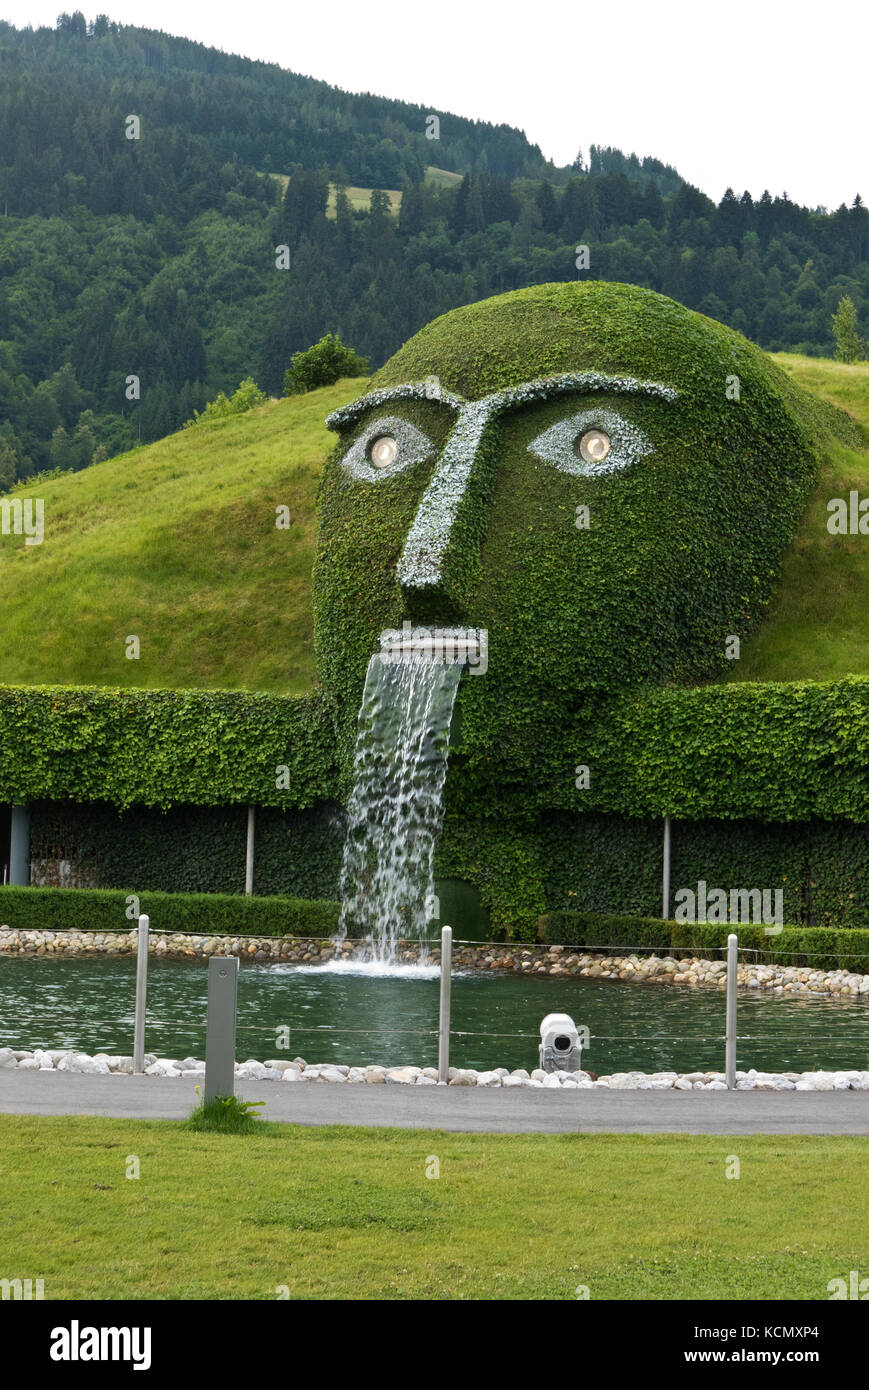 spiraal Evacuatie ontwikkelen The Giant face at the entrance to the Swarovski Crystal Worlds, Wattens,  Austria Stock Photo - Alamy